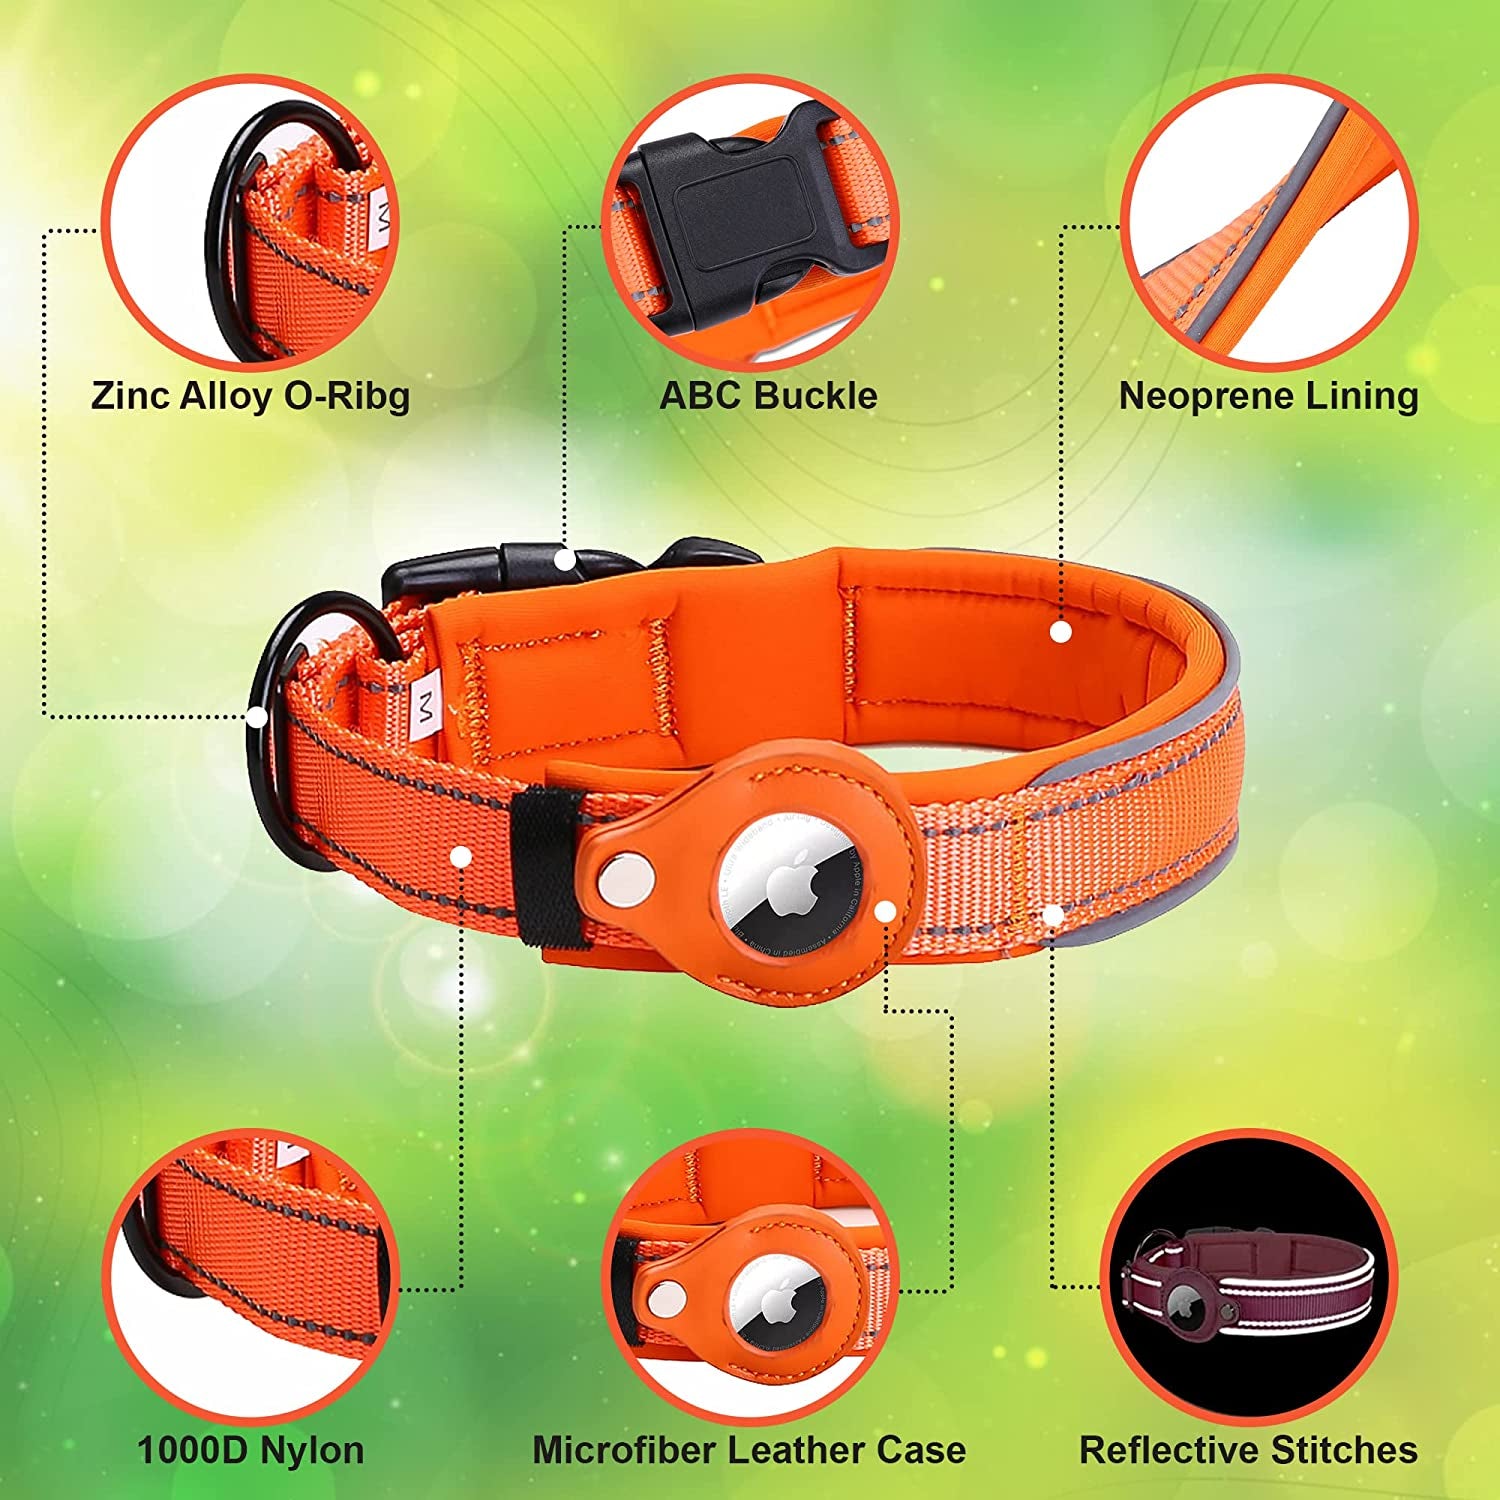 Dog Tracking Collar for Apple Airtag- Reflective Pet Collar with Airtag Holder Case, Adjustable, Durable, Stylish, Padded, Heavy-Duty Dog Collars - S, M, L, XL Size